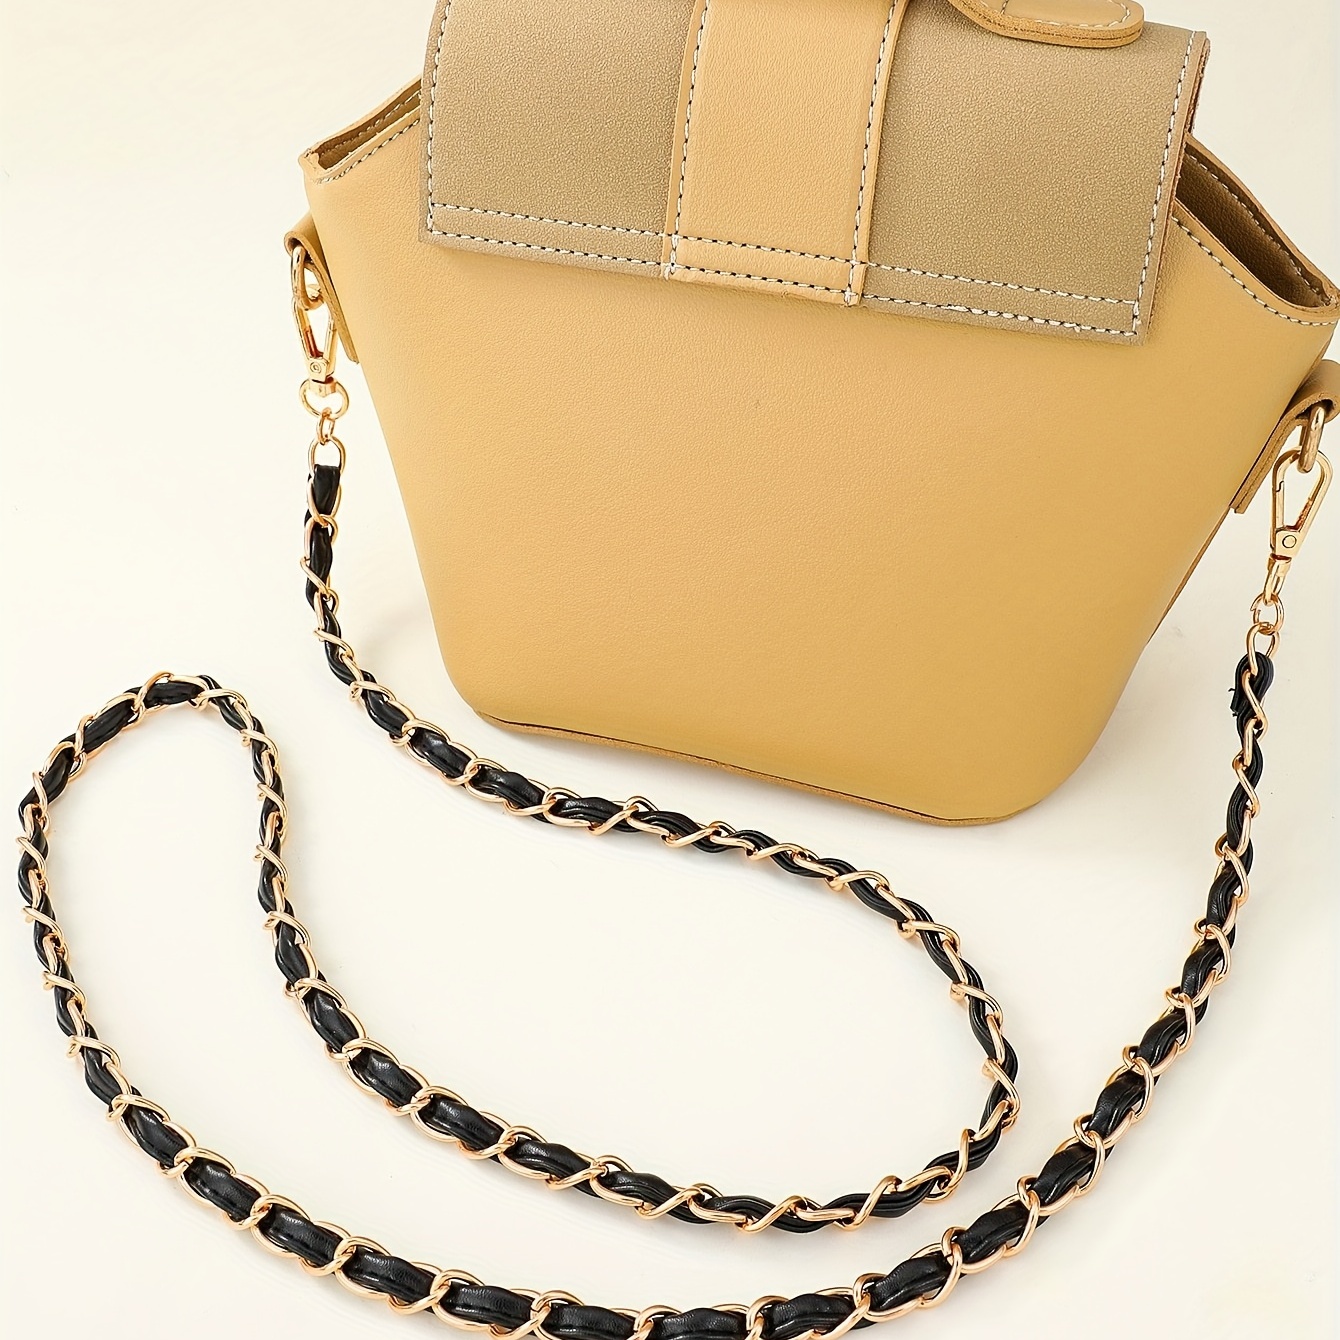 Metal Plus Synthetic Leather Purse Chain Strap Golden Black Pu